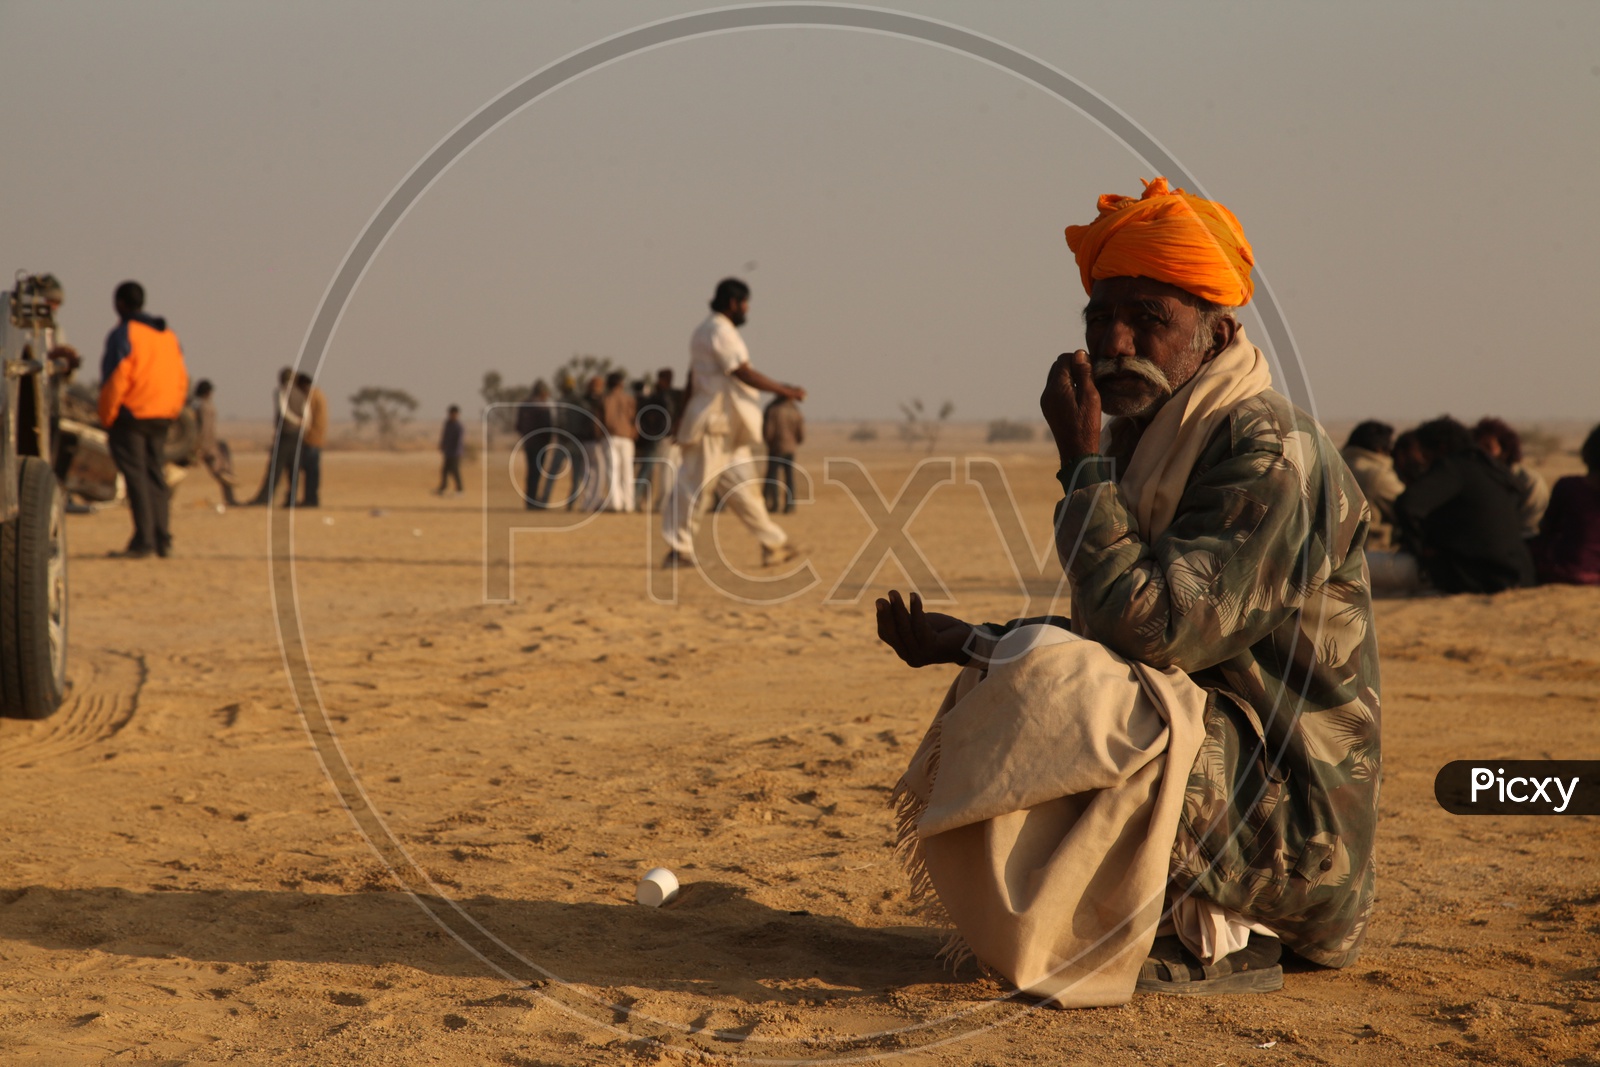 Indian Old Man in a Desert